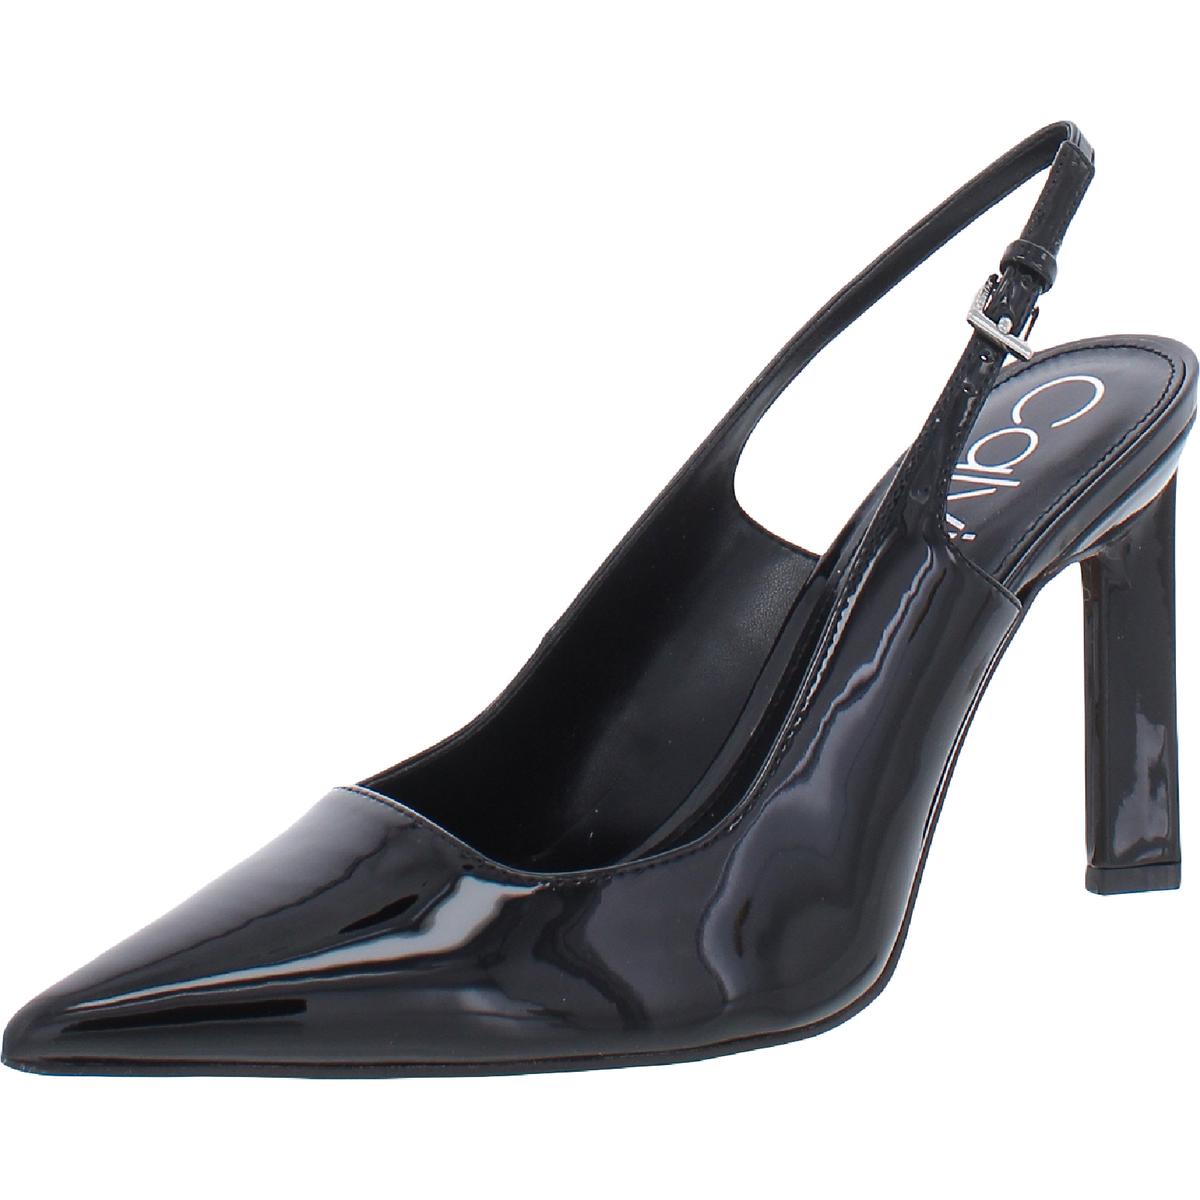 Calvin Klein Attract Womens Pointed Toe Pumps Slingback Heels